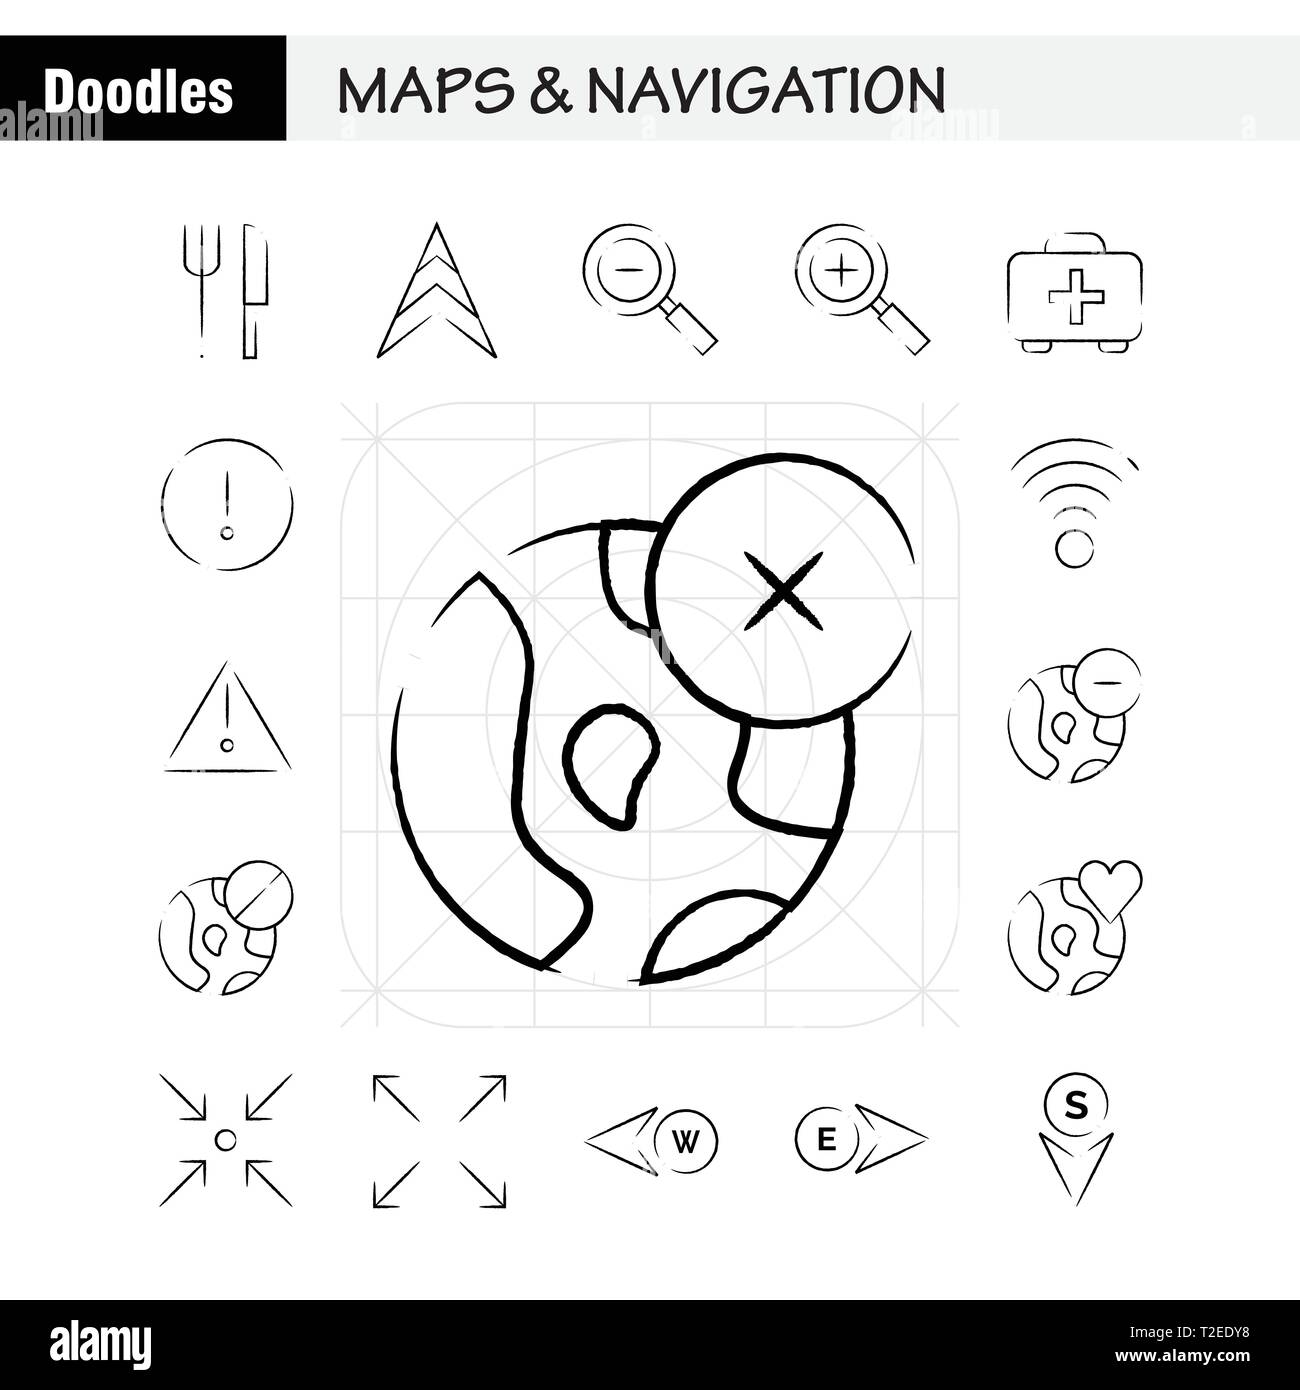 Maps And Navigation Hand Drawn Icon Pack For Designers And Developers. Icons Of Food, Fork, Kitchen, Knife, Tools, Arrow, Bearing, Direction, Vector Stock Vector